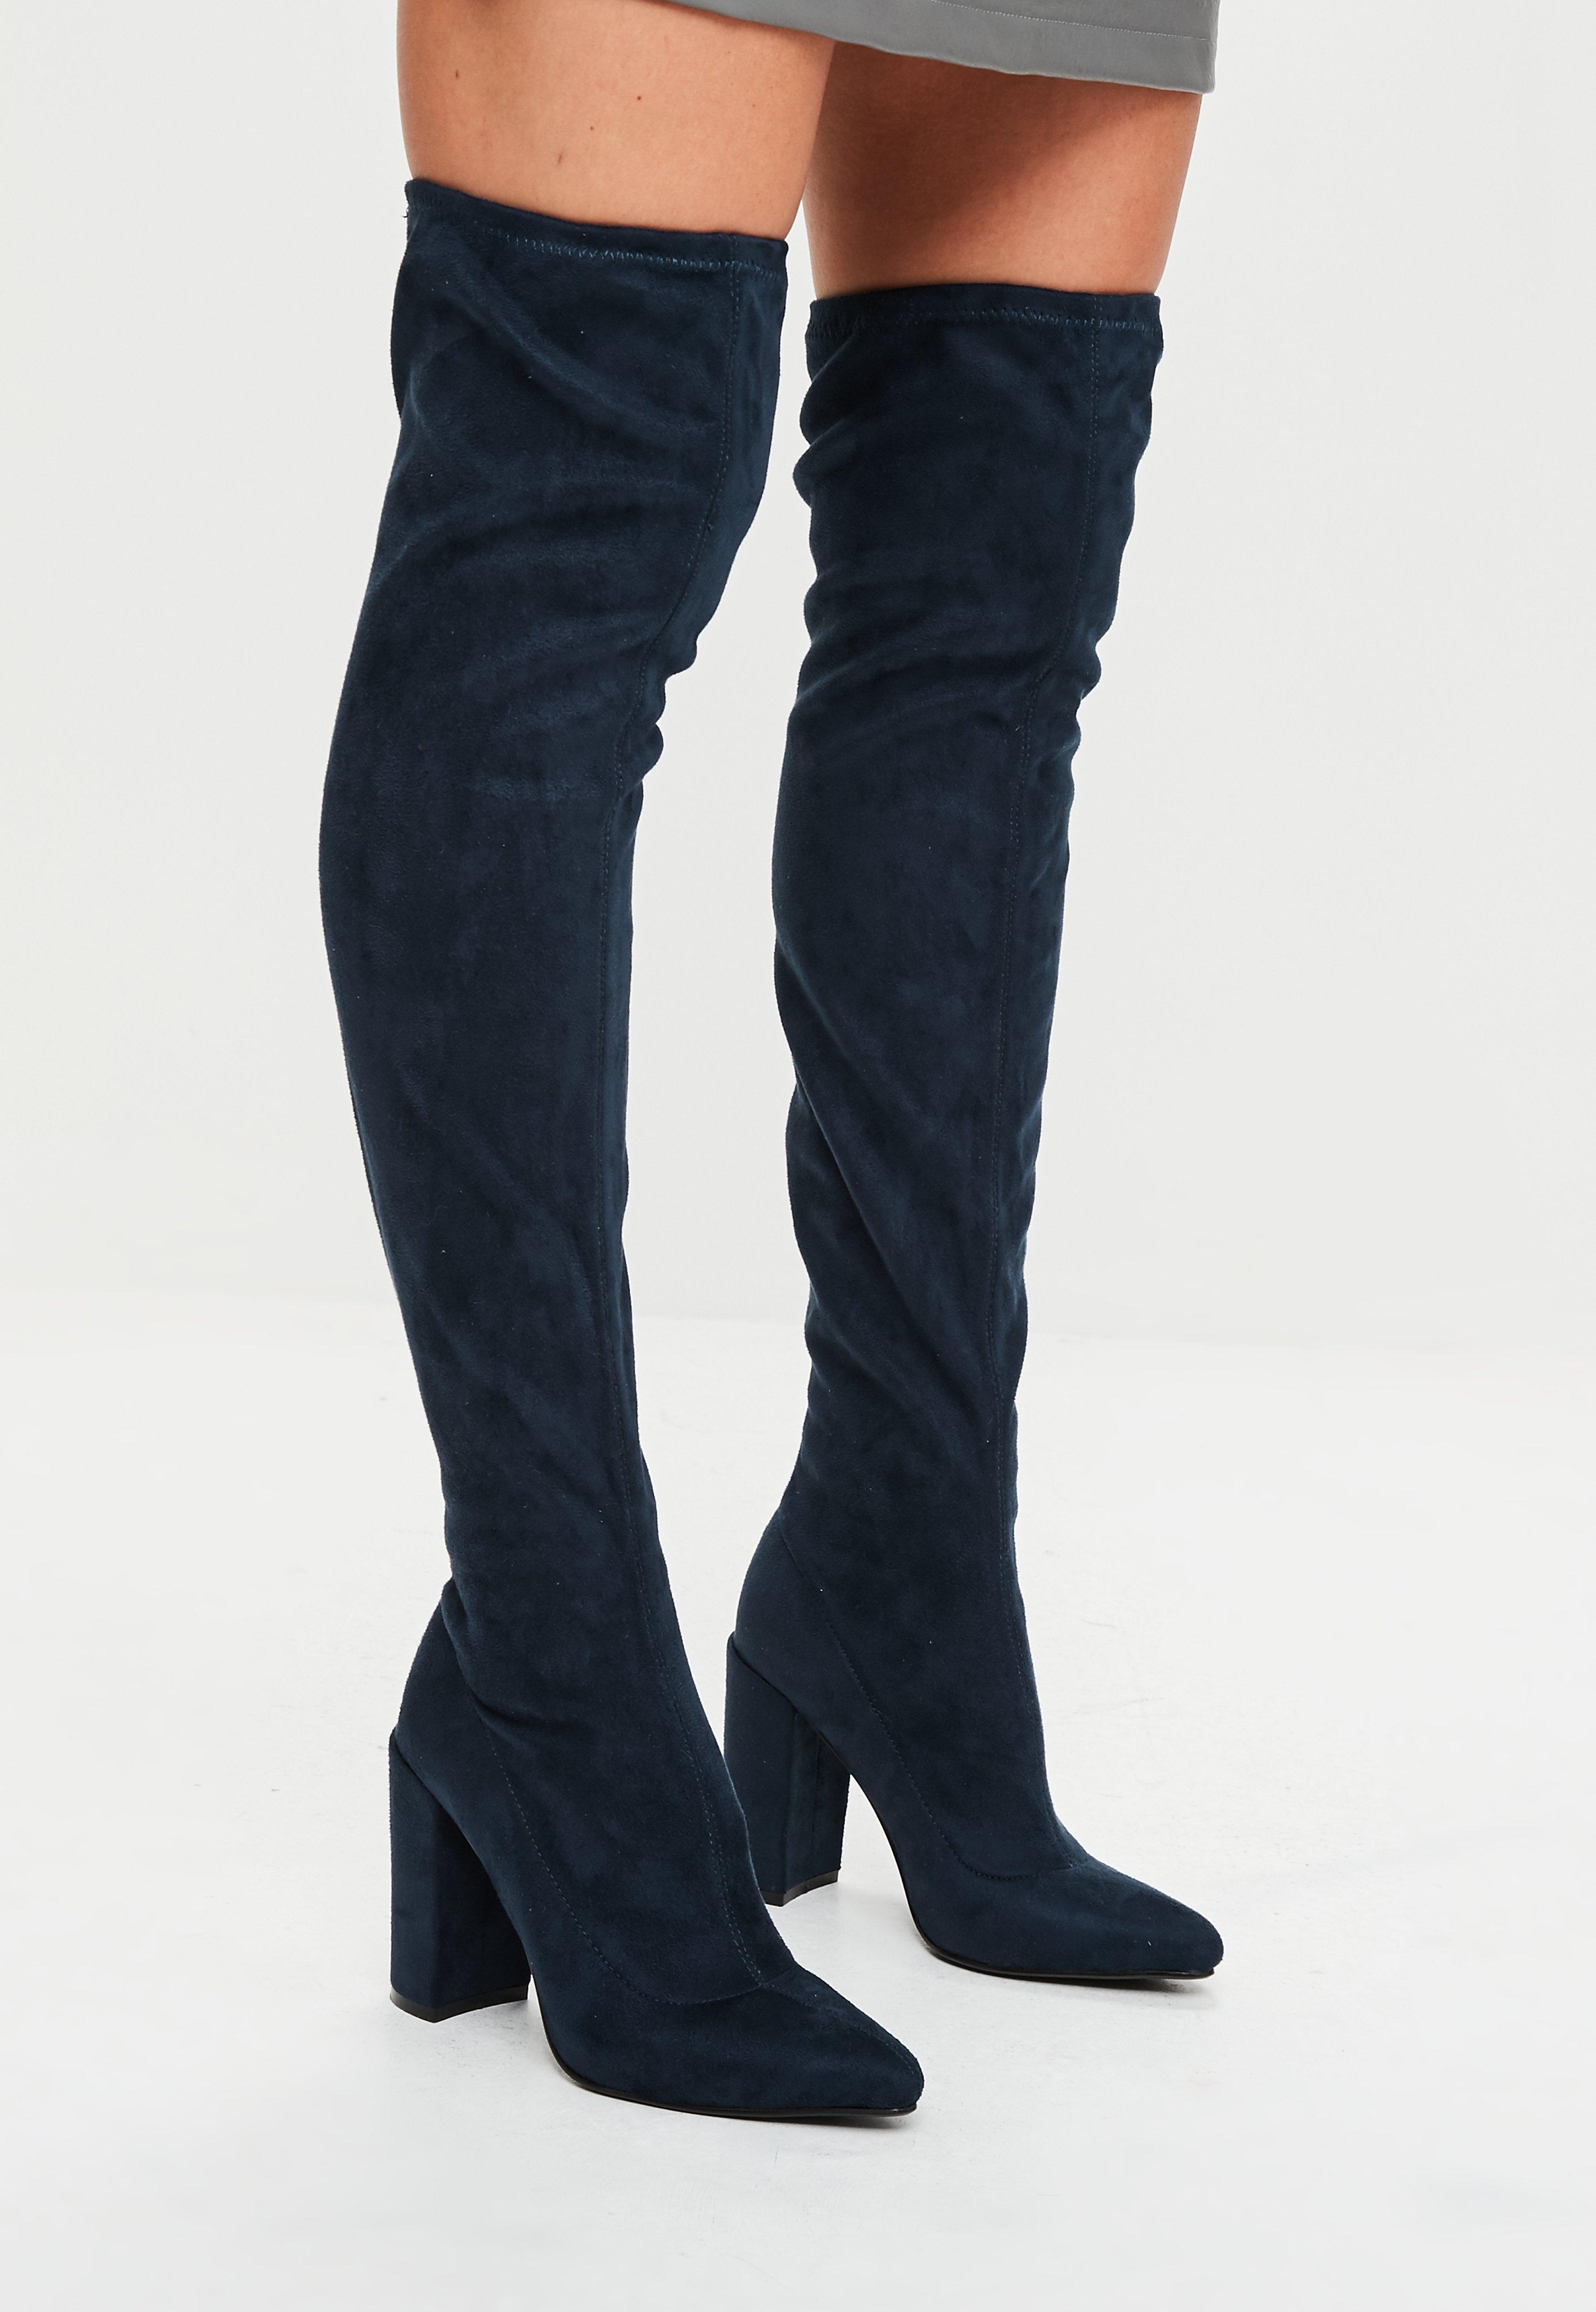 Lyst - Missguided Navy Pointed Faux Suede Over The Knee Boots in Blue